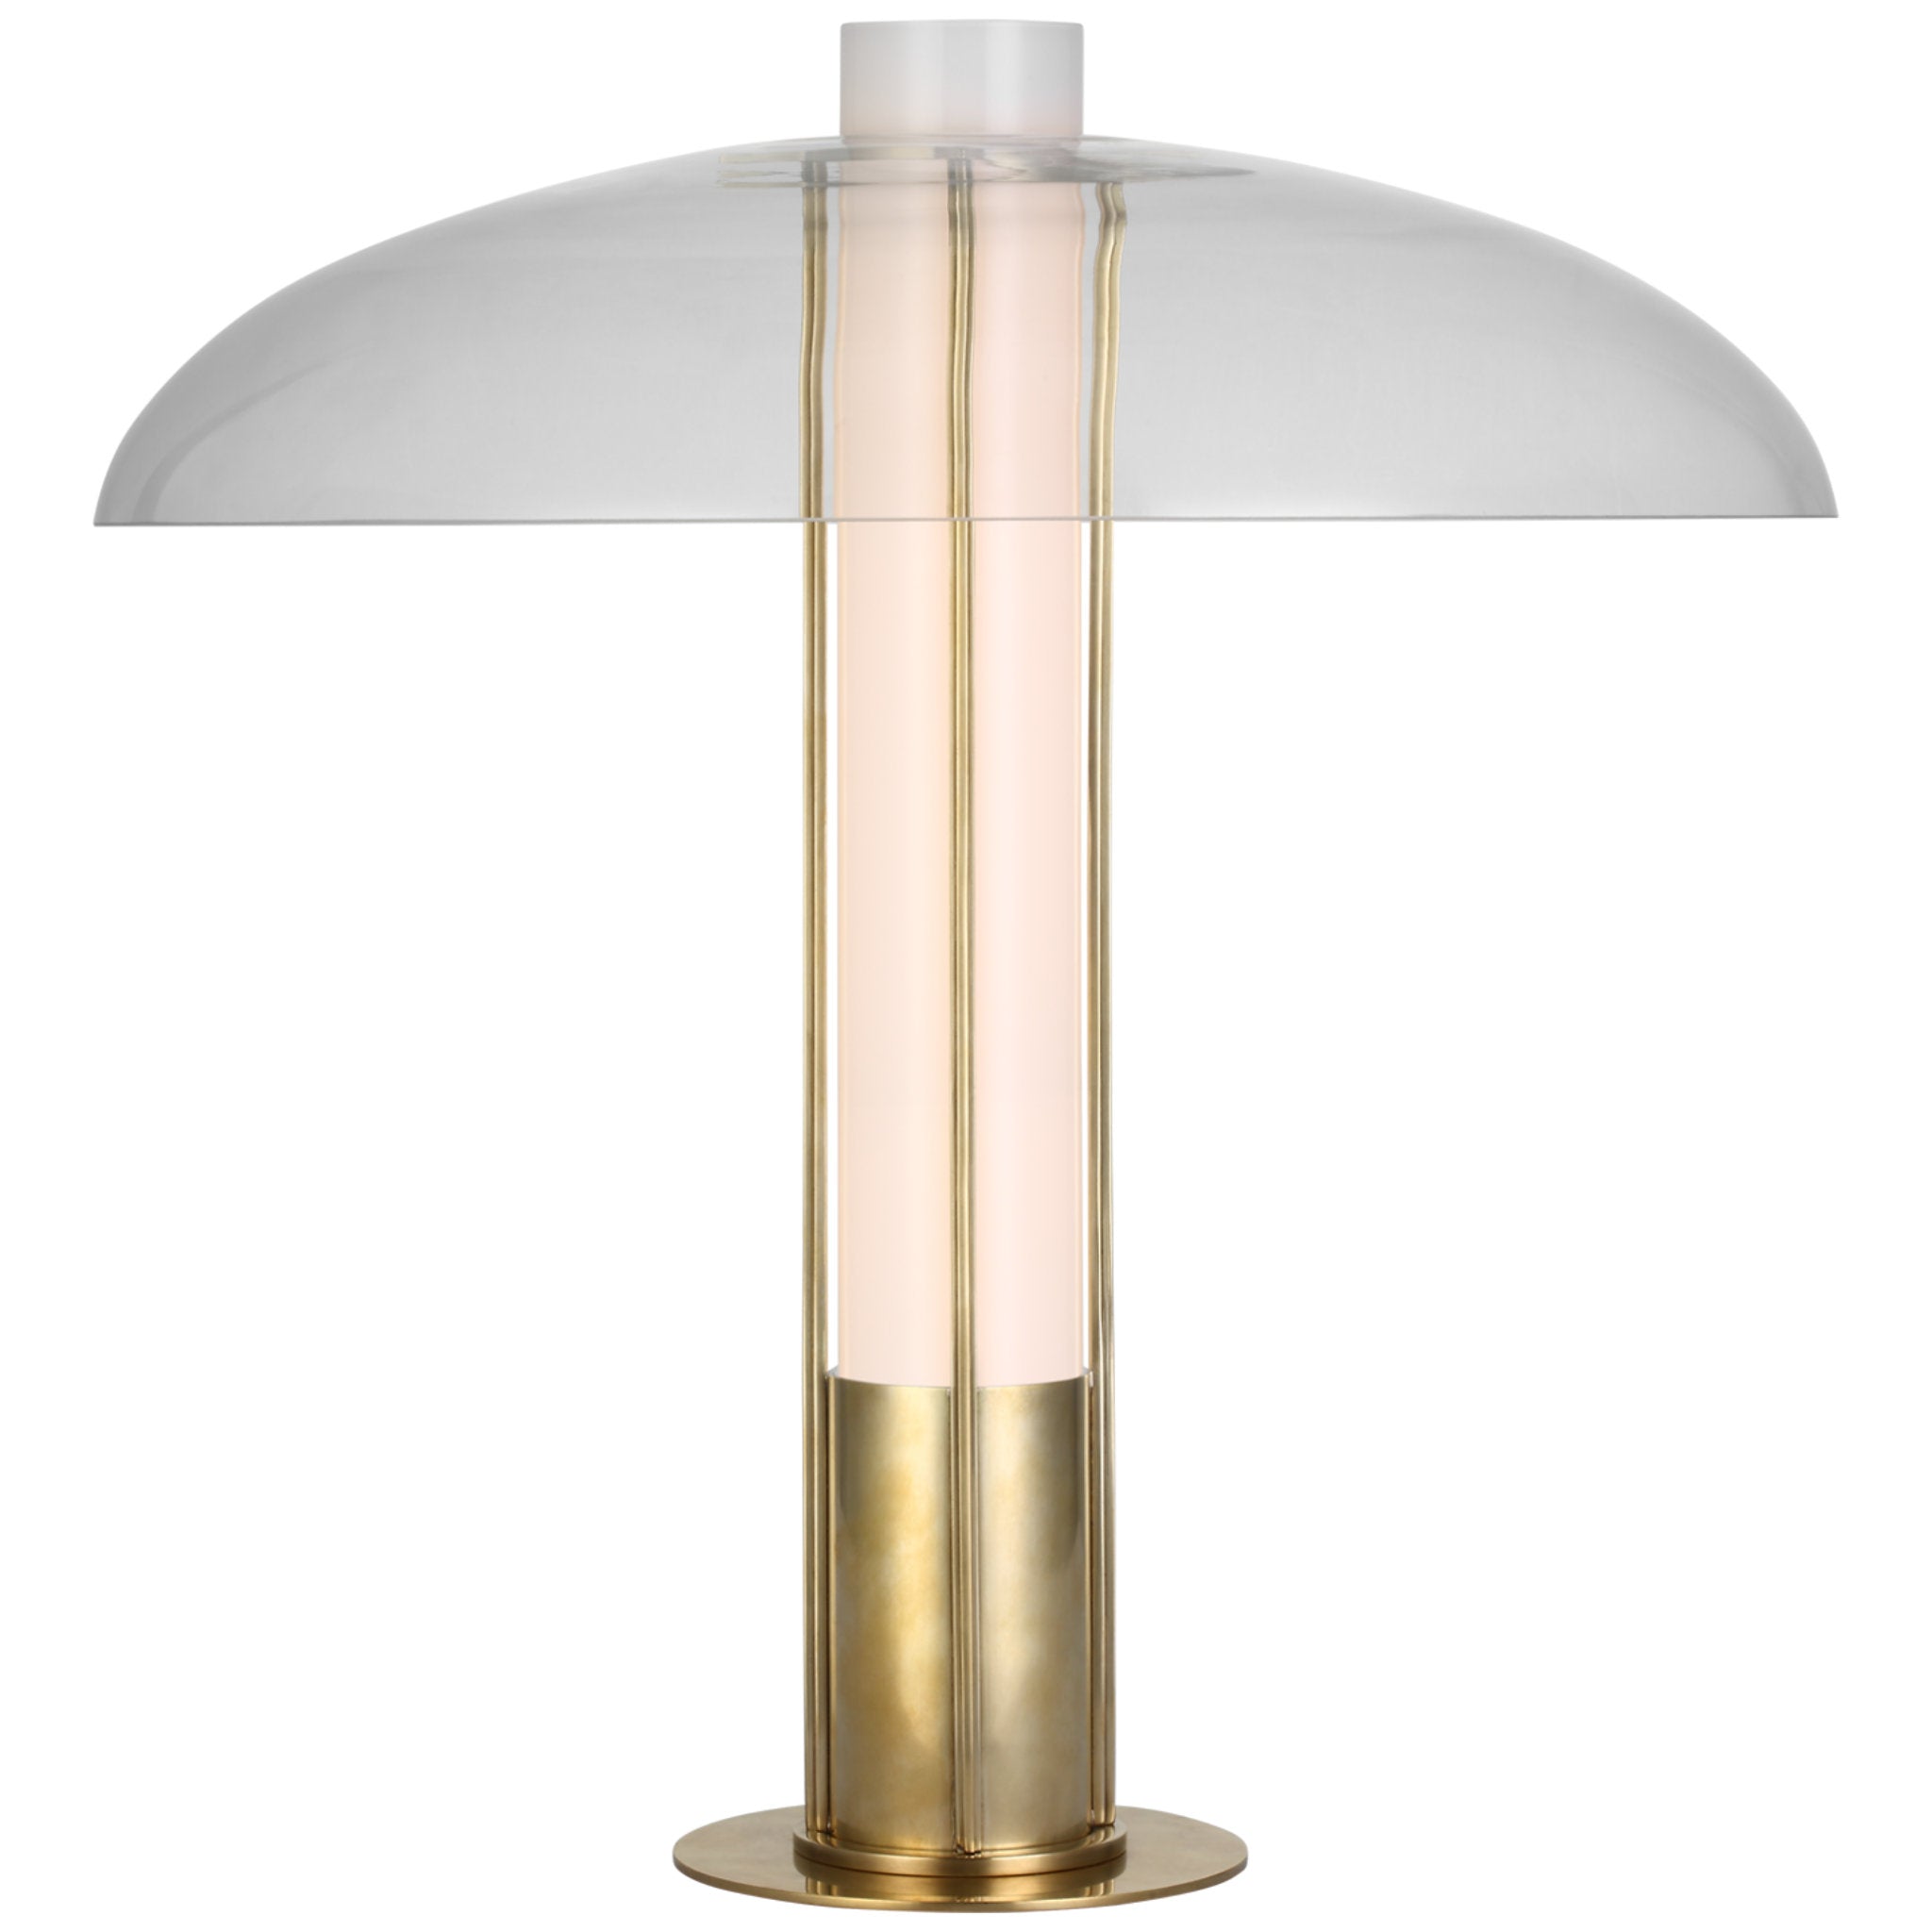 Kelly Wearstler Troye Medium Table Lamp in Antique-Burnished Brass with Clear Glass